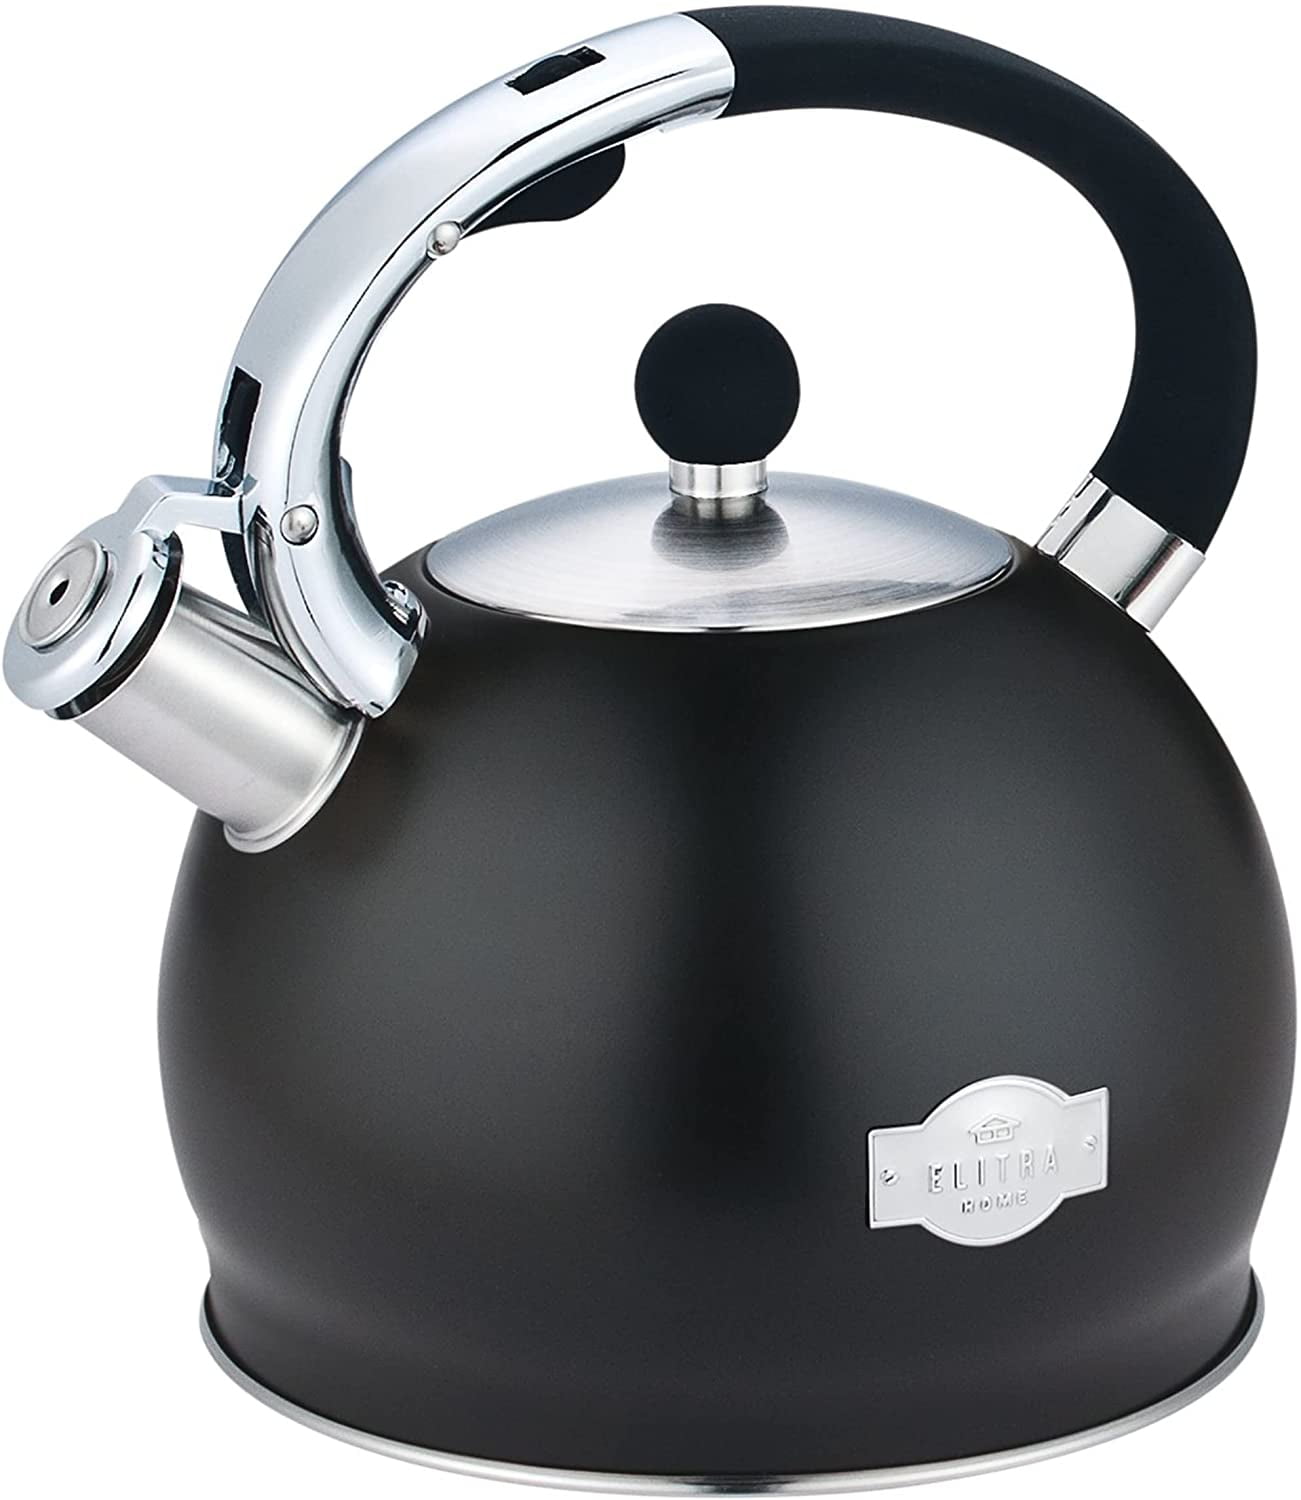 GANAZONO Stainless Steel Teapot Self Heating Hot Pot Tea Pots for Loose Tea  Stovetop Tea Maker Tea Kettle with Infuser Whistling Stainless Steel Water